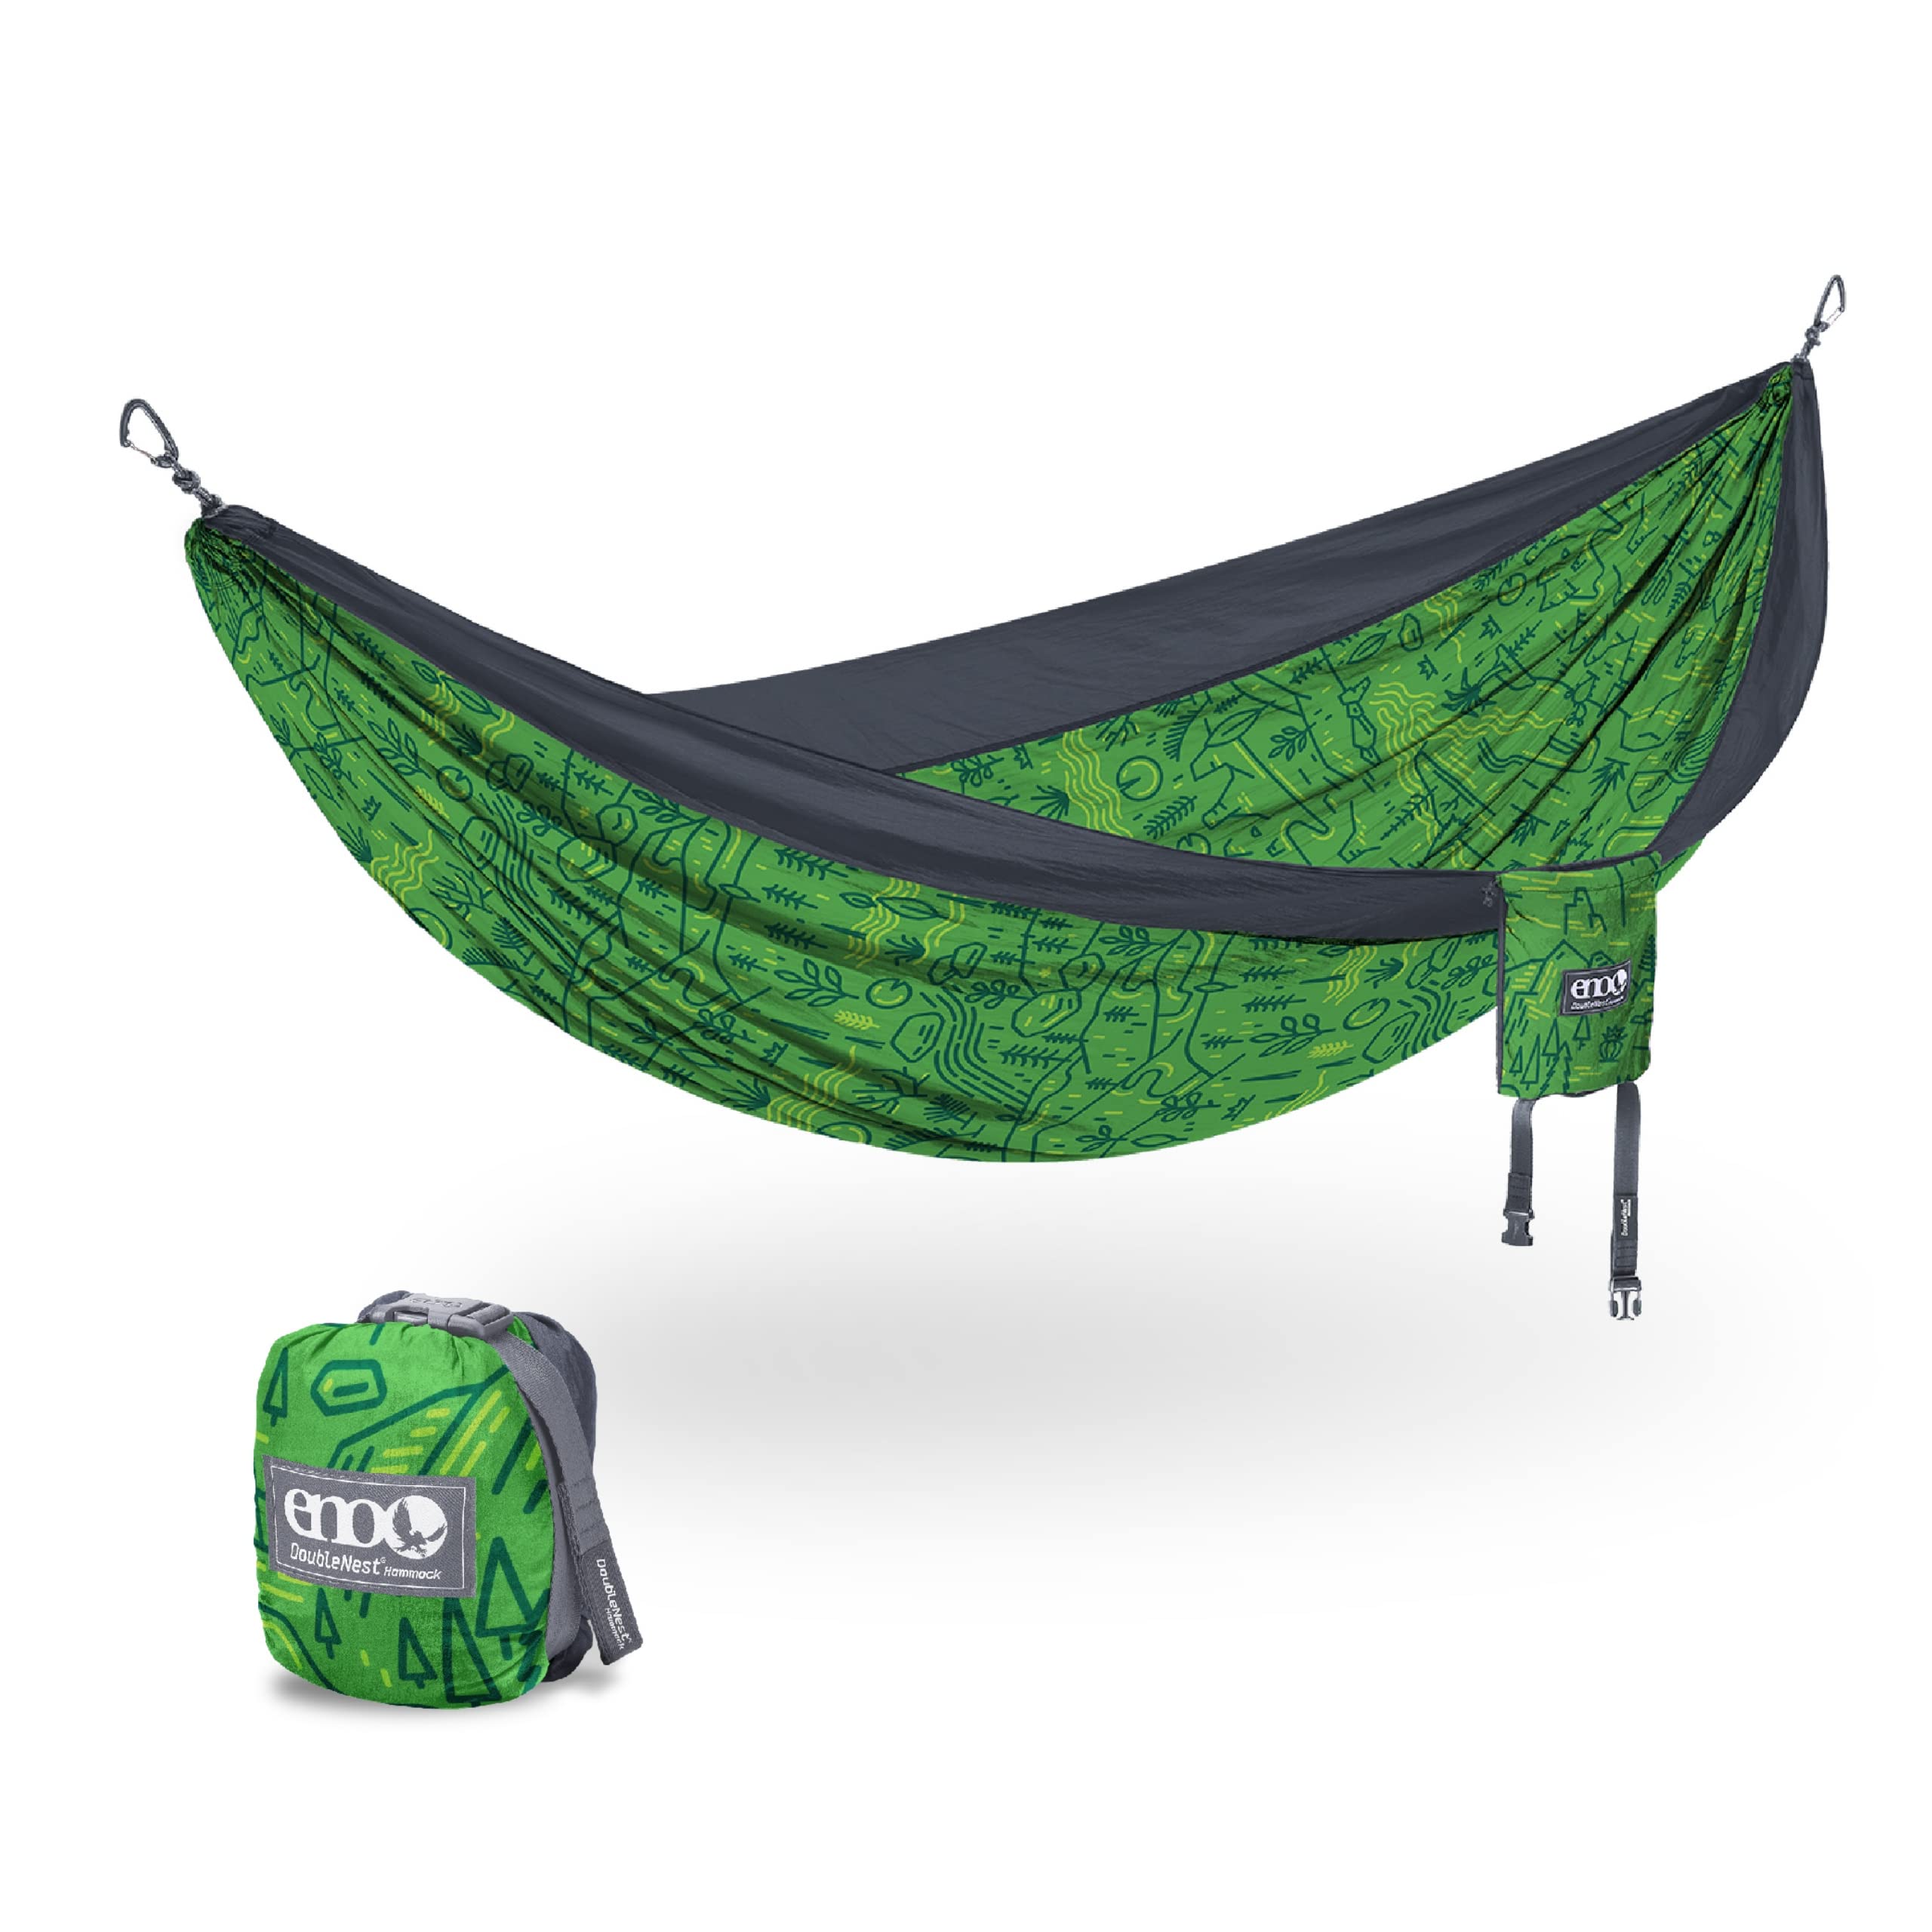 ENO DoubleNest Hammock - Lightweight Portable 1 to 2 Person Hammock - for Camping Hiking Backpacking Travel a Festival